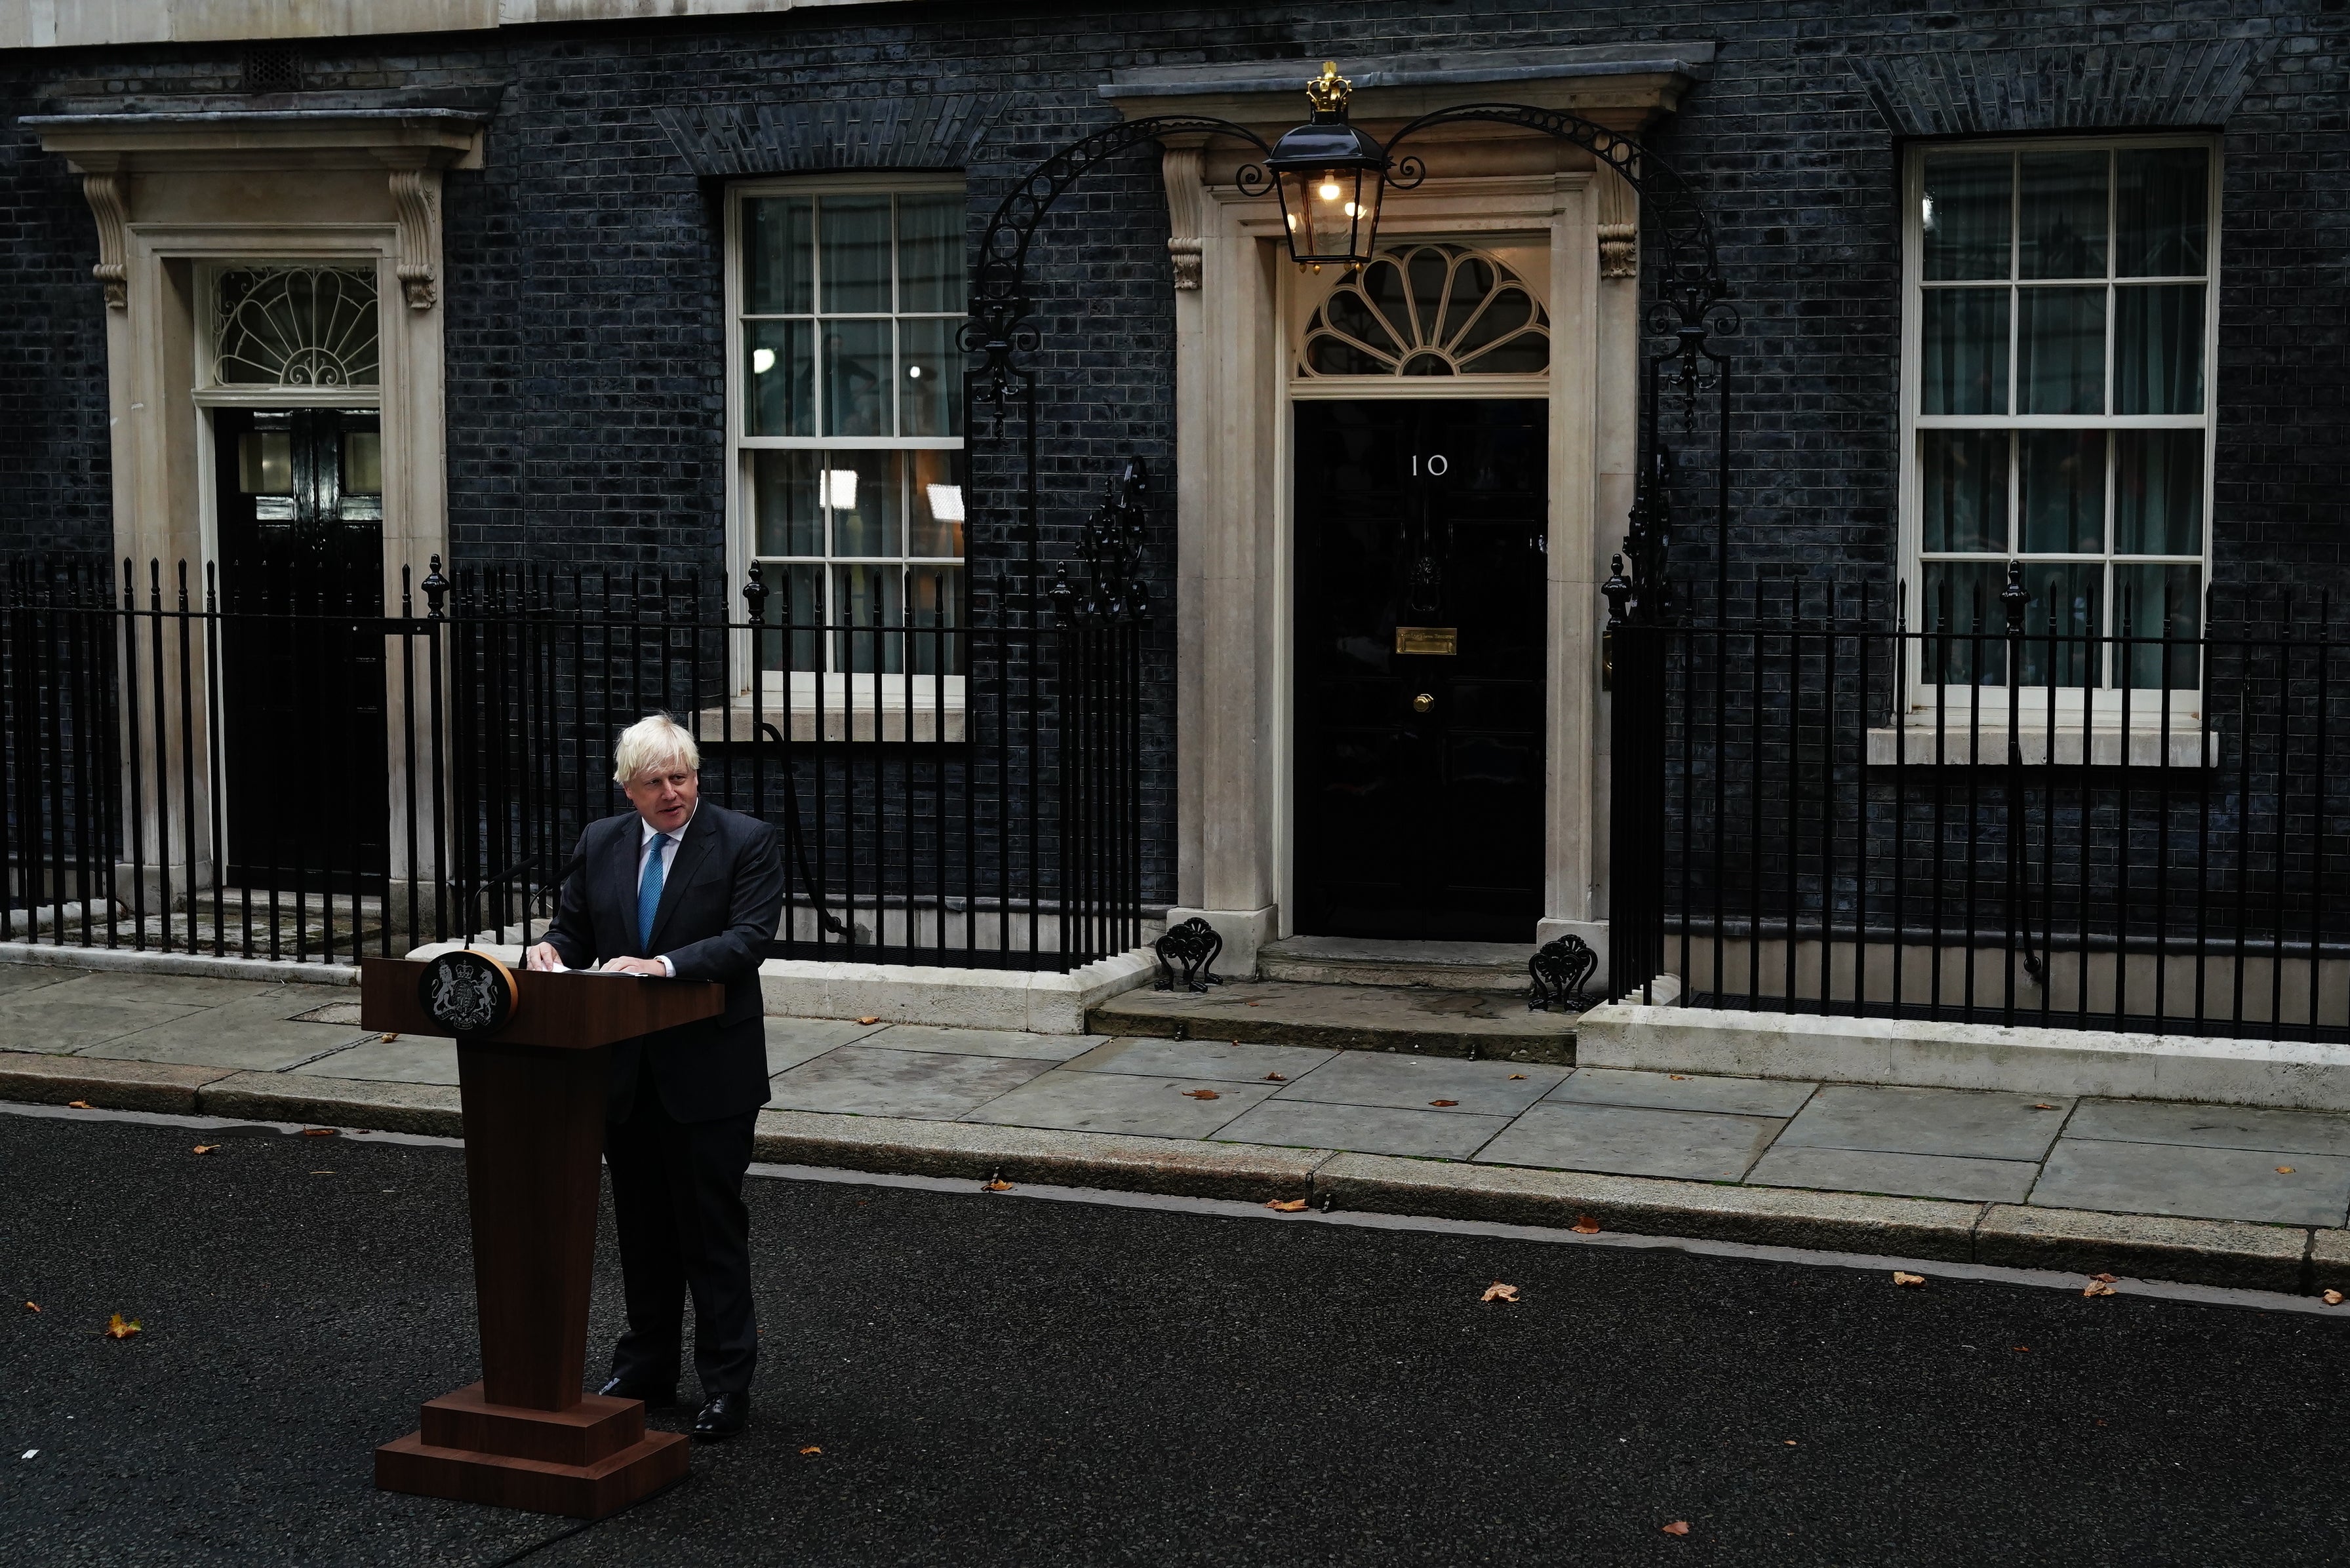 Outgoing Prime Minister Boris Johnson makes a speech outside 10 Downing Street, London, before leaving for Balmoral for an audience with Queen Elizabeth II to formally resign as Prime Minister. Picture date: Tuesday September 6, 2022.